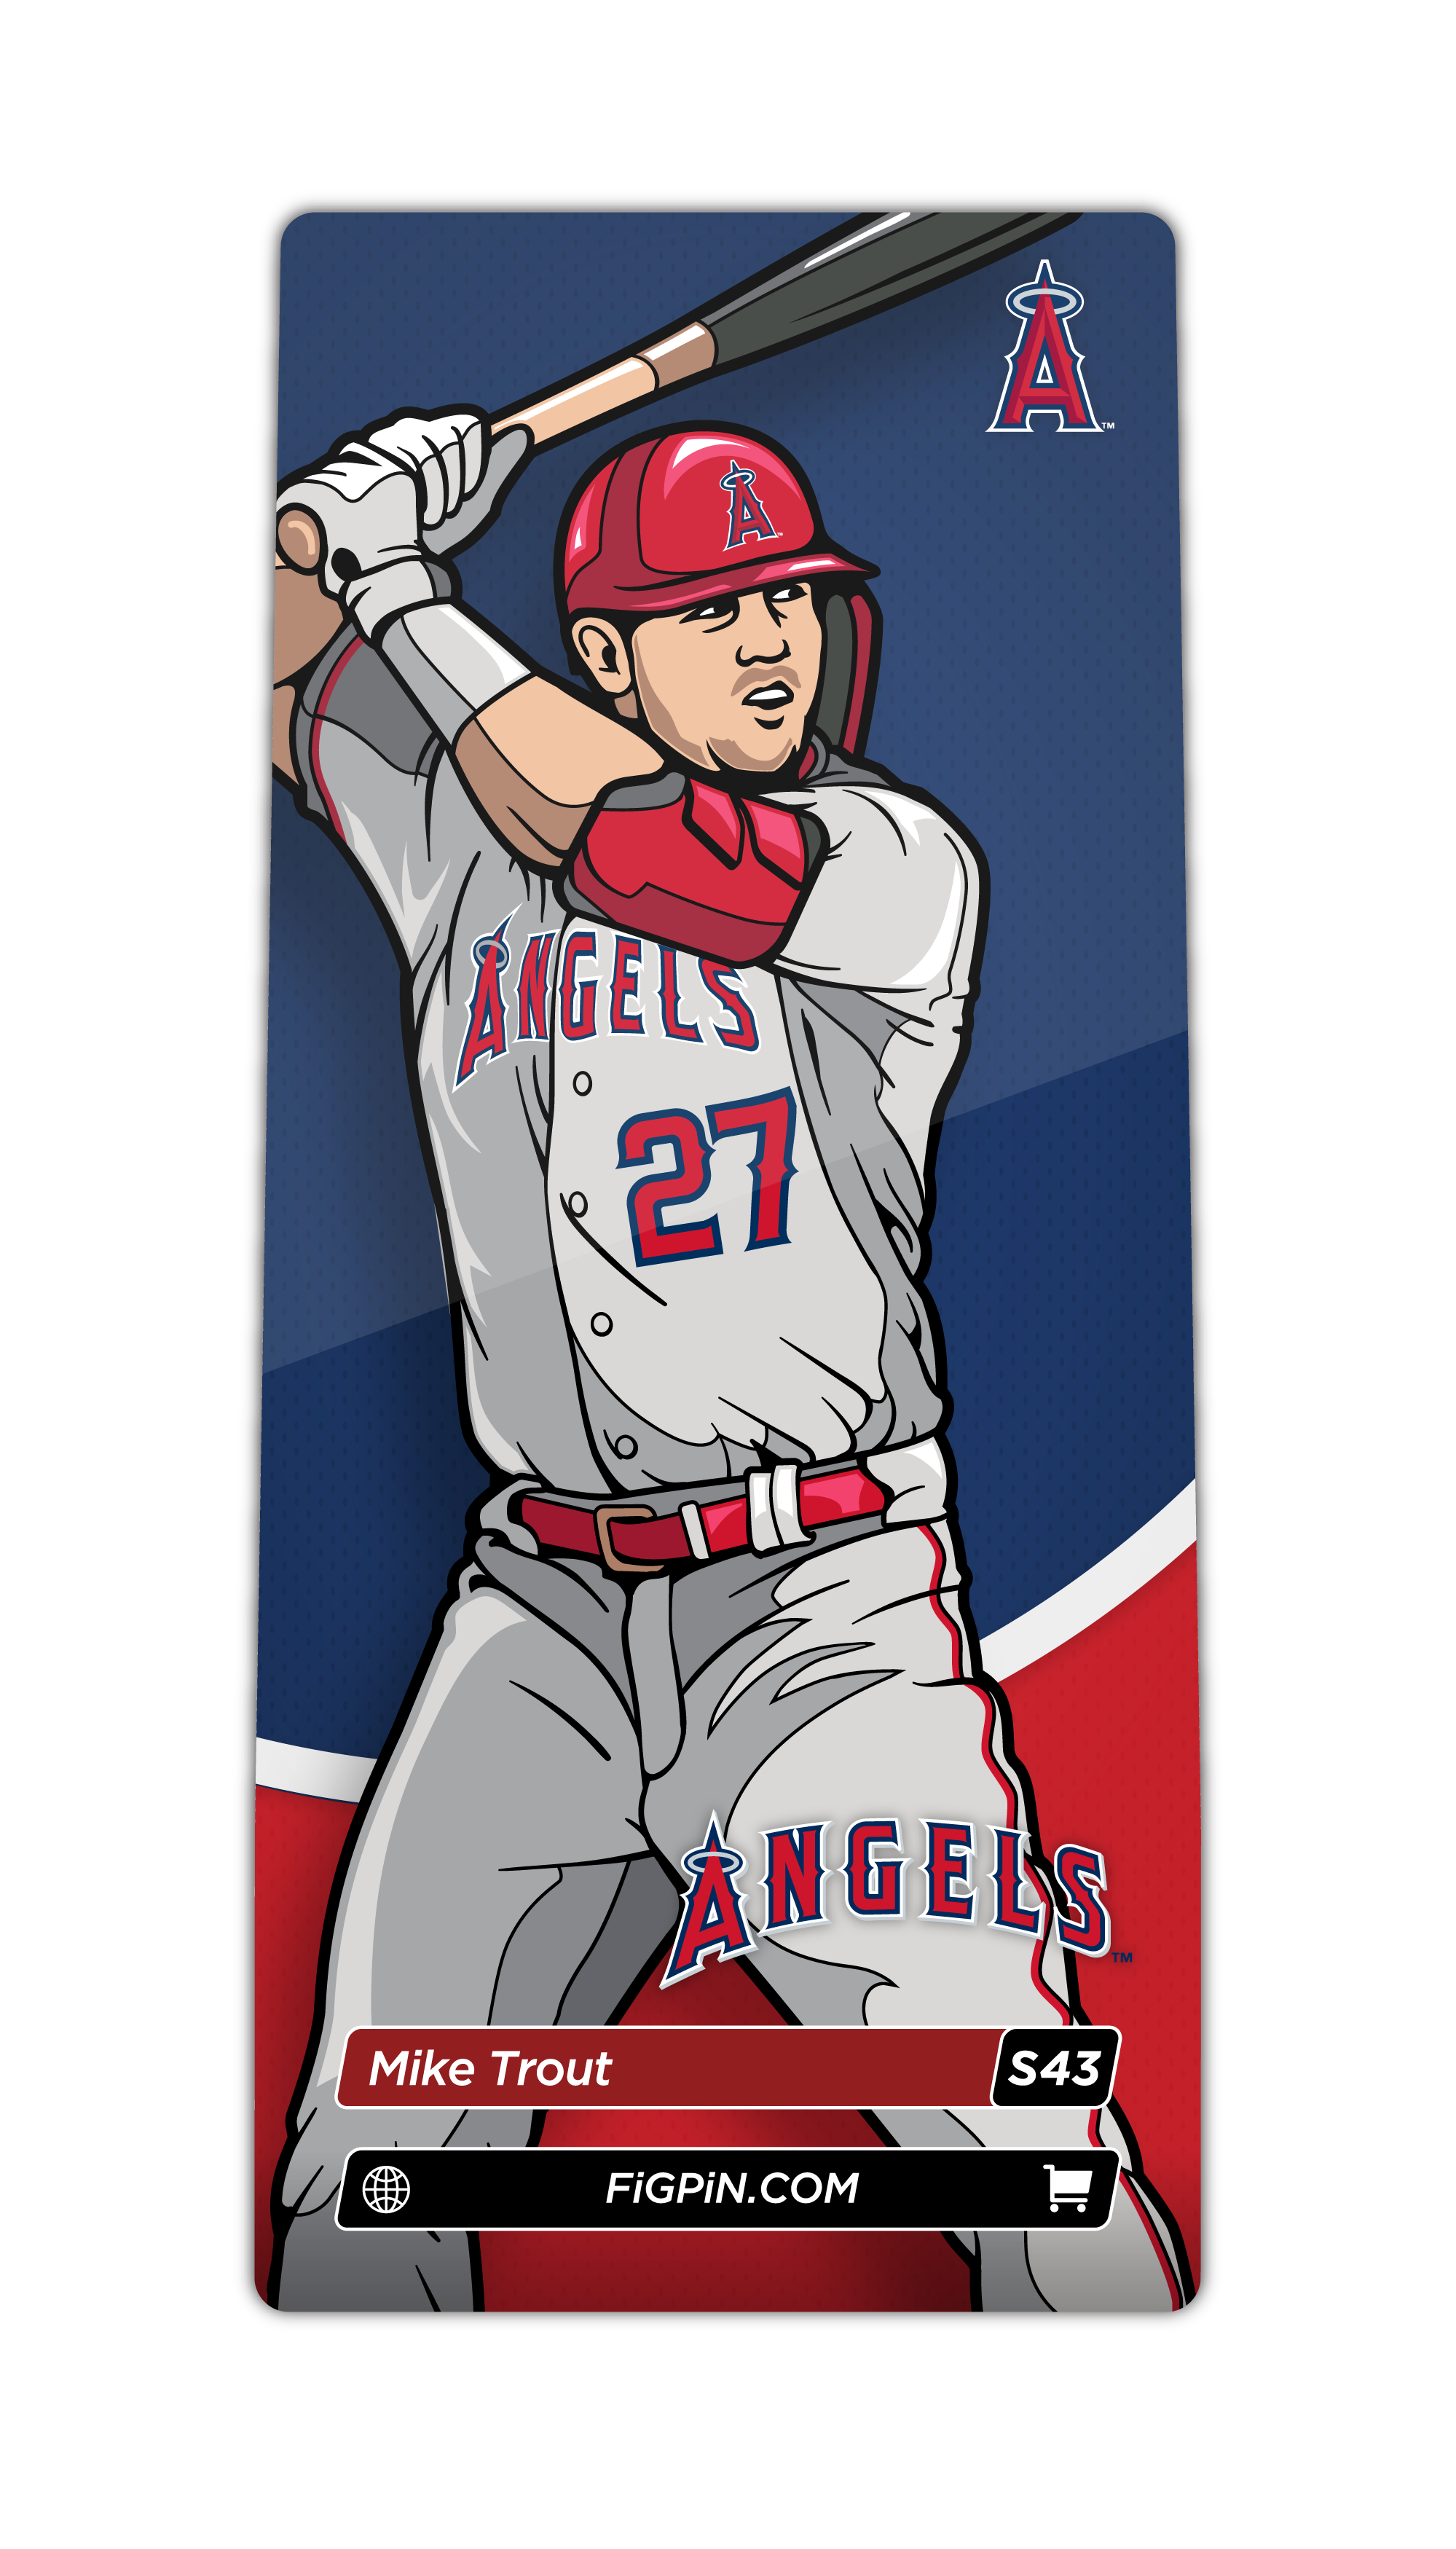 Mike Trout (S43)